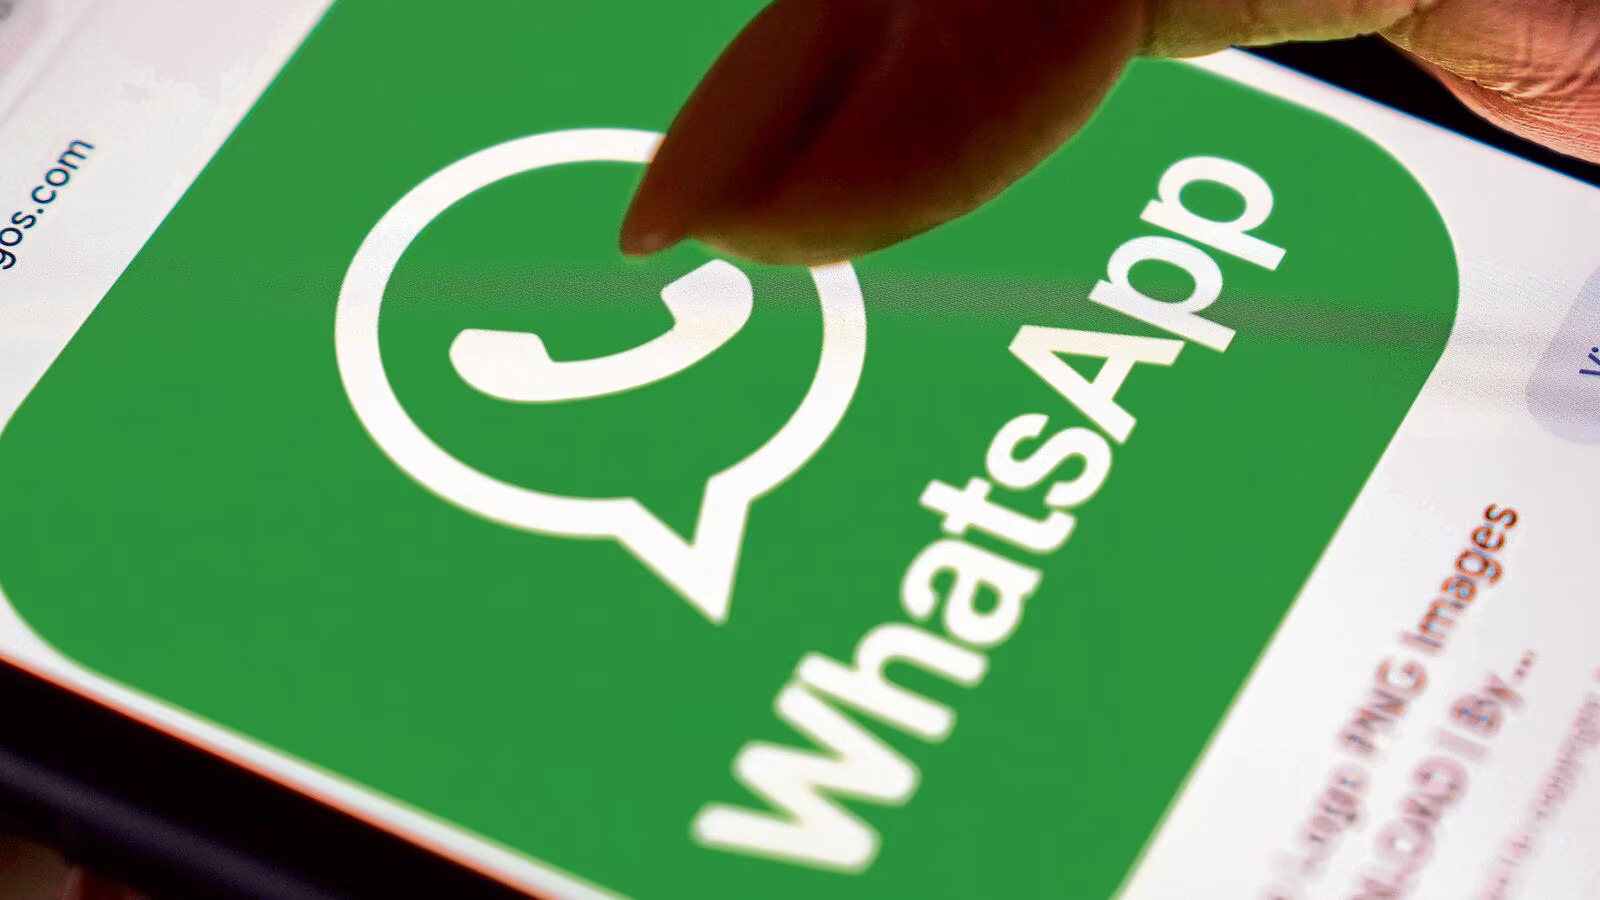 WhatsApp Rolls Out Testing for New 'Recently Active' Contacts Feature